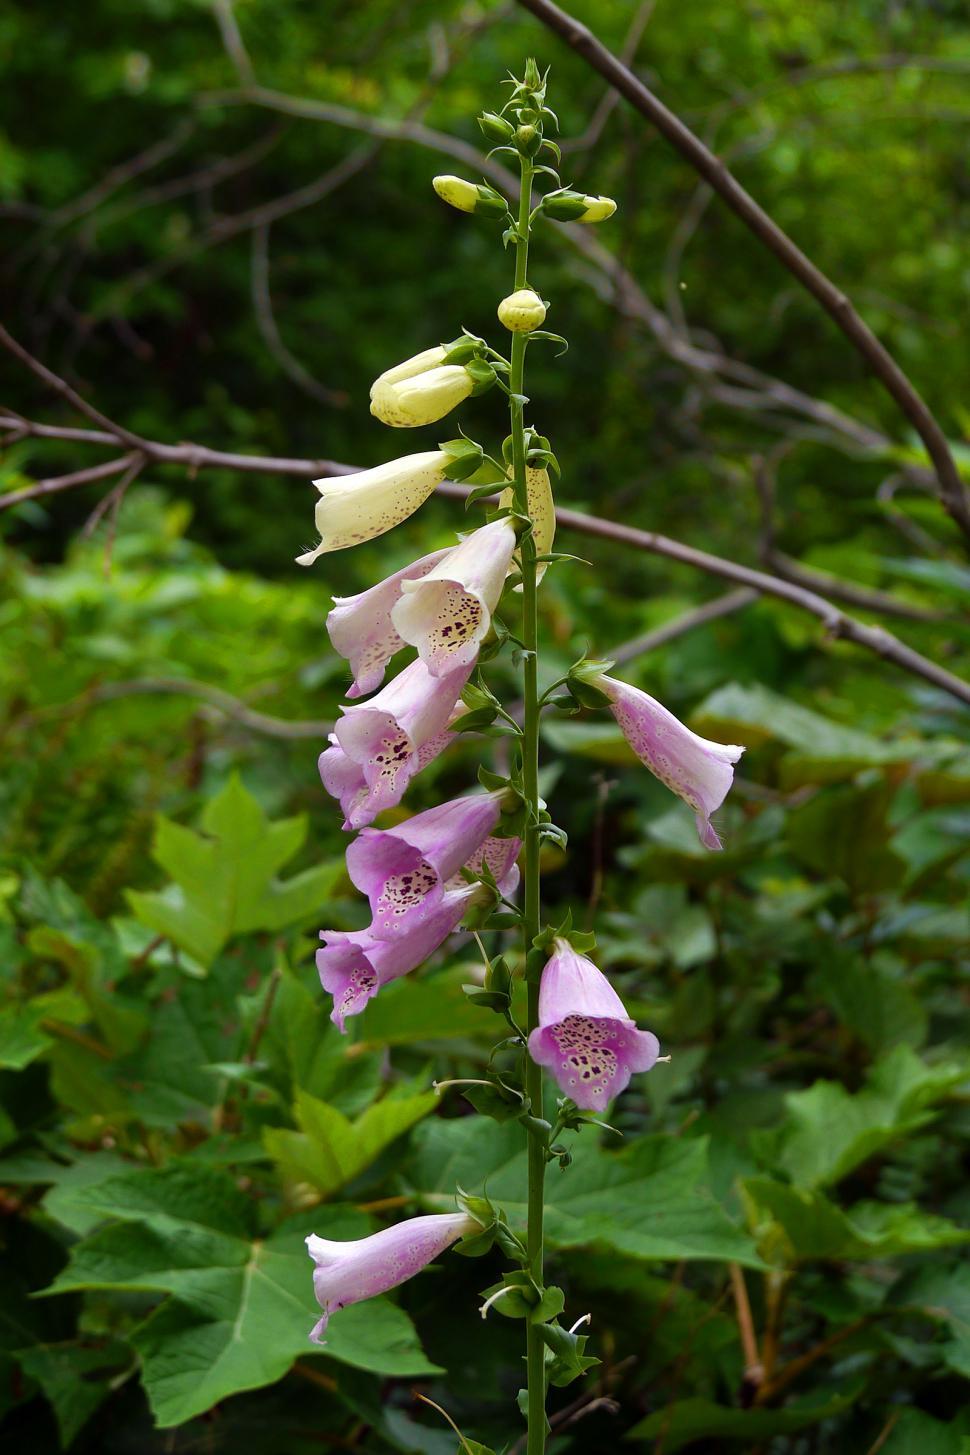 Free Image of Common Fox Gloves Blossoms 